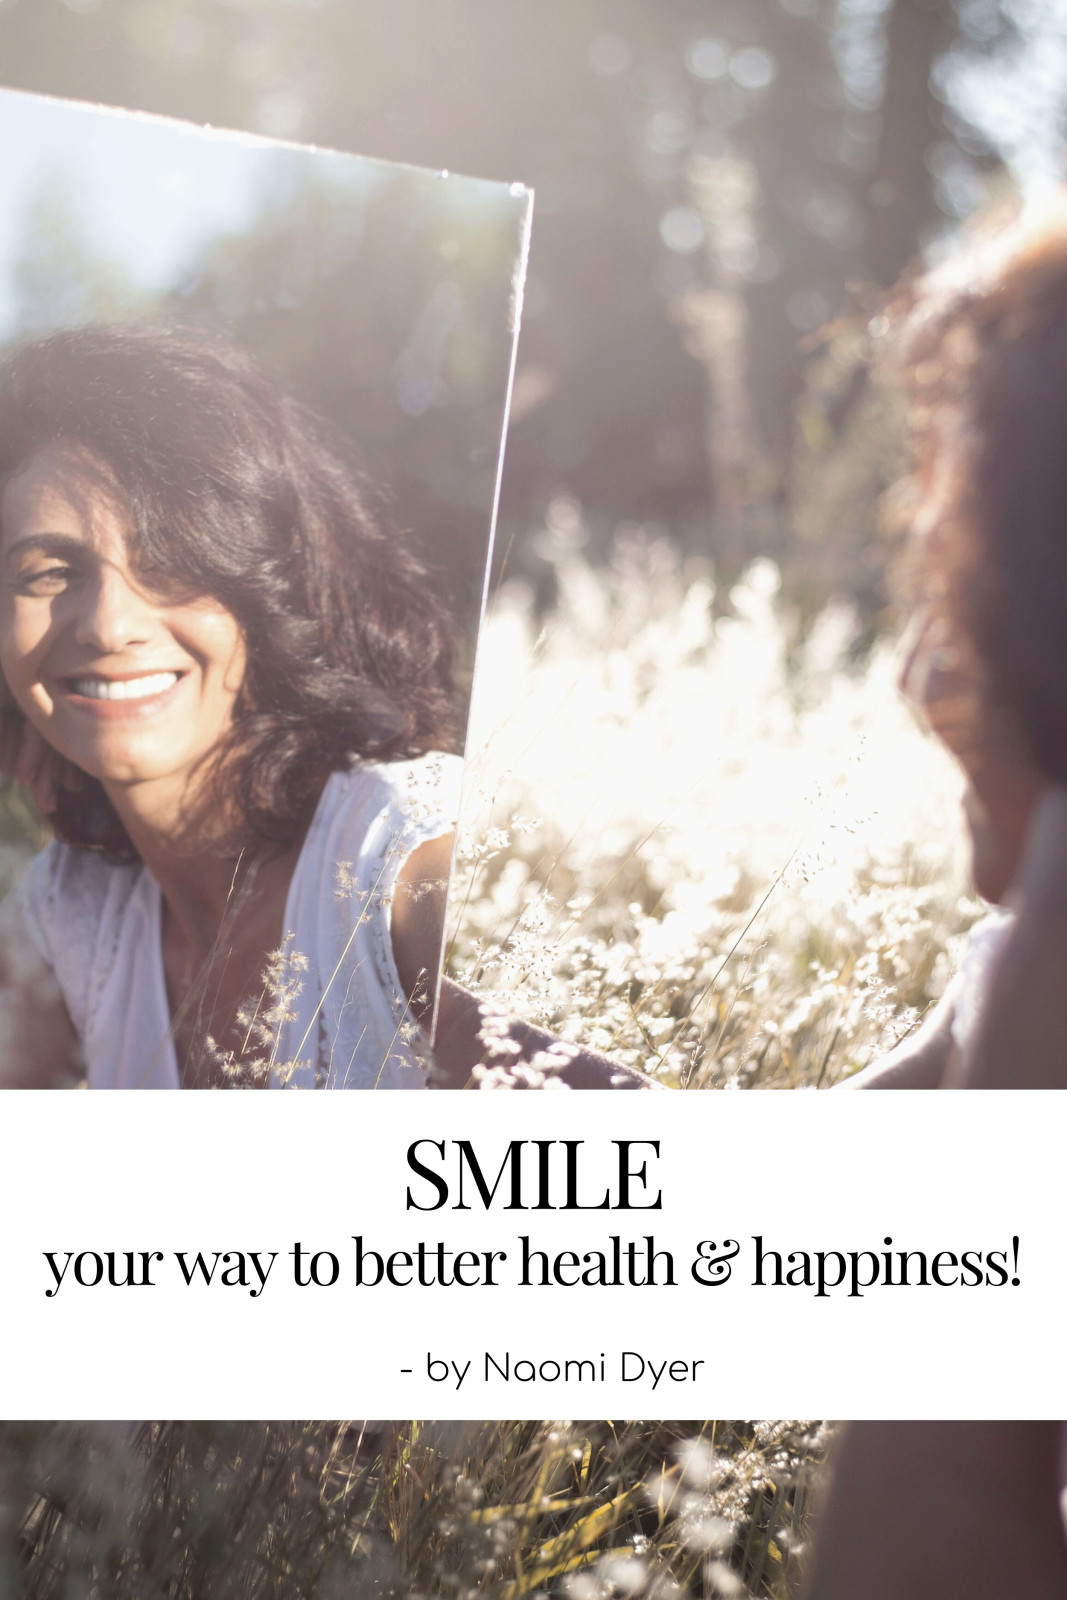 SMILE your way to better health & happiness!